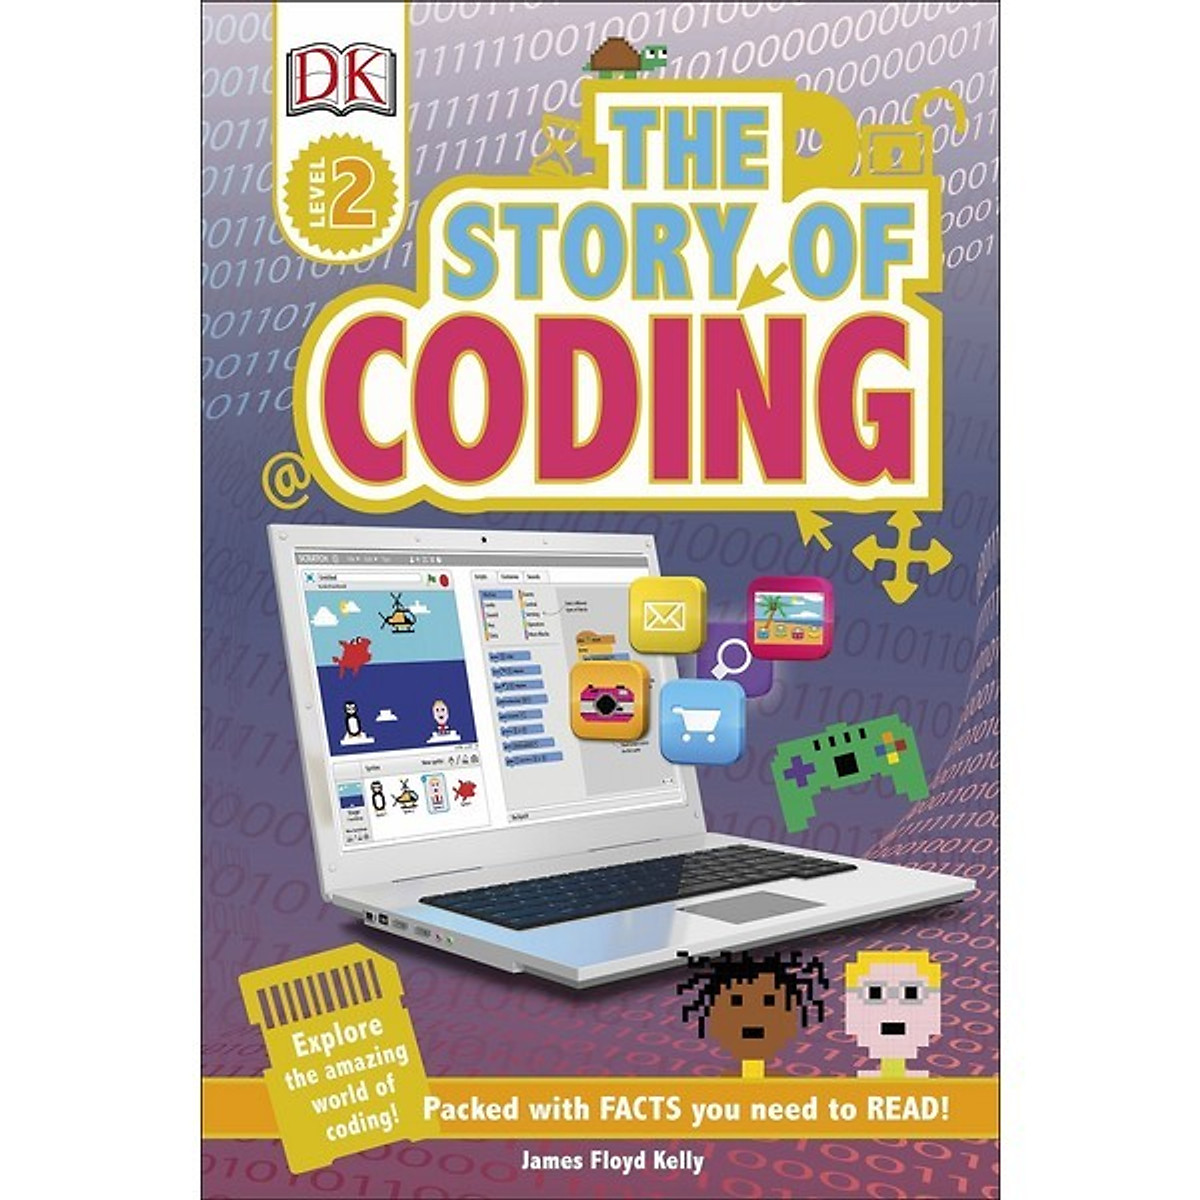 The Story of Coding